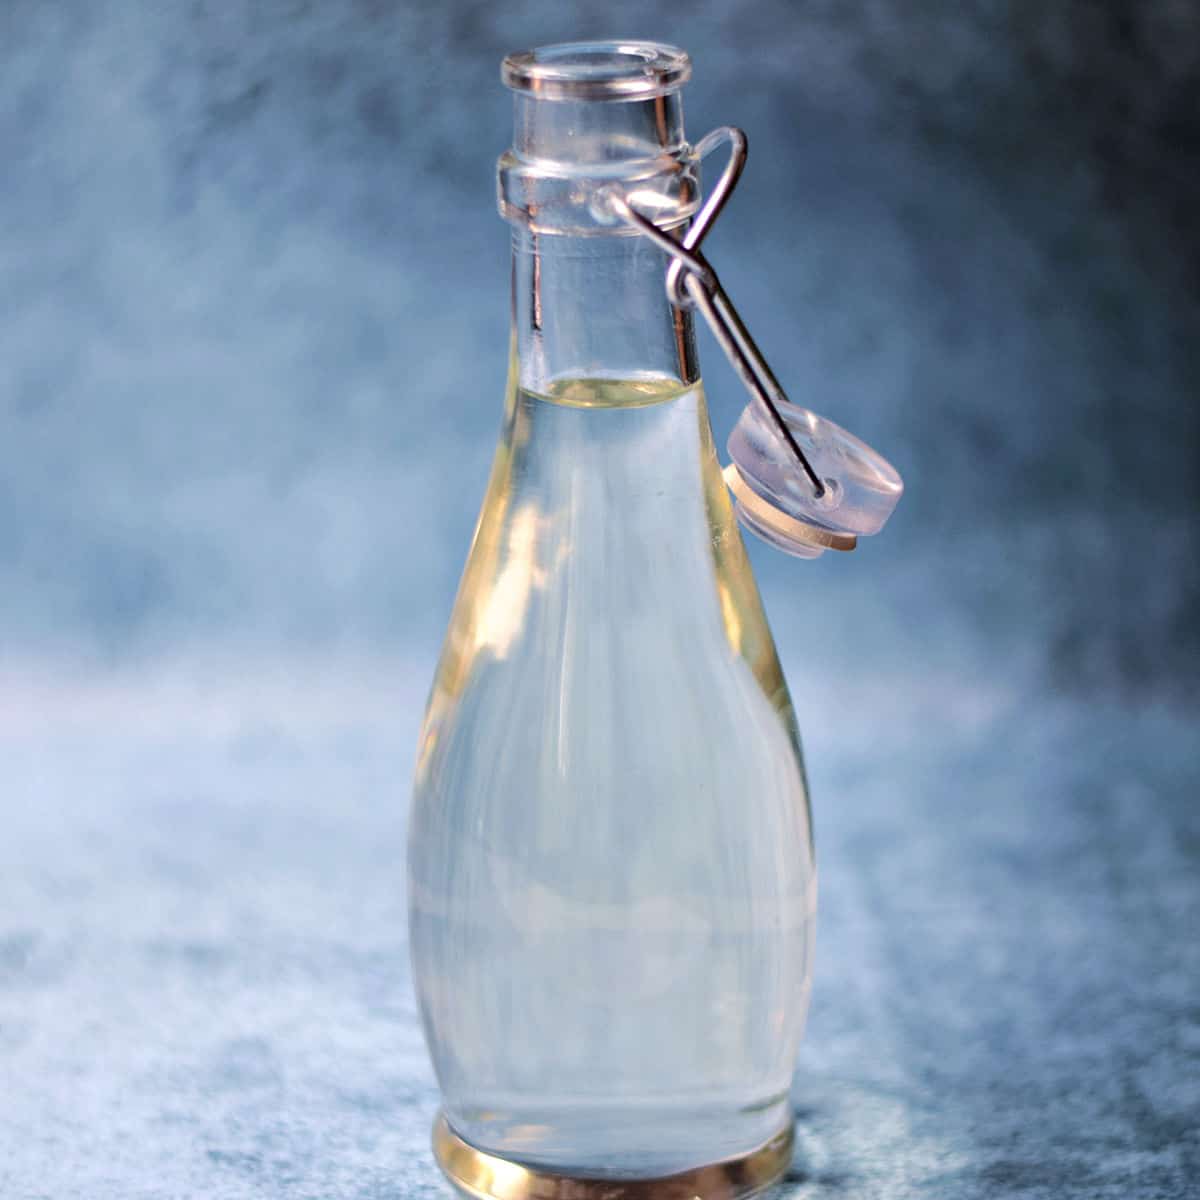 Clear simple syrup in a glass bottle with a blue sponged background.